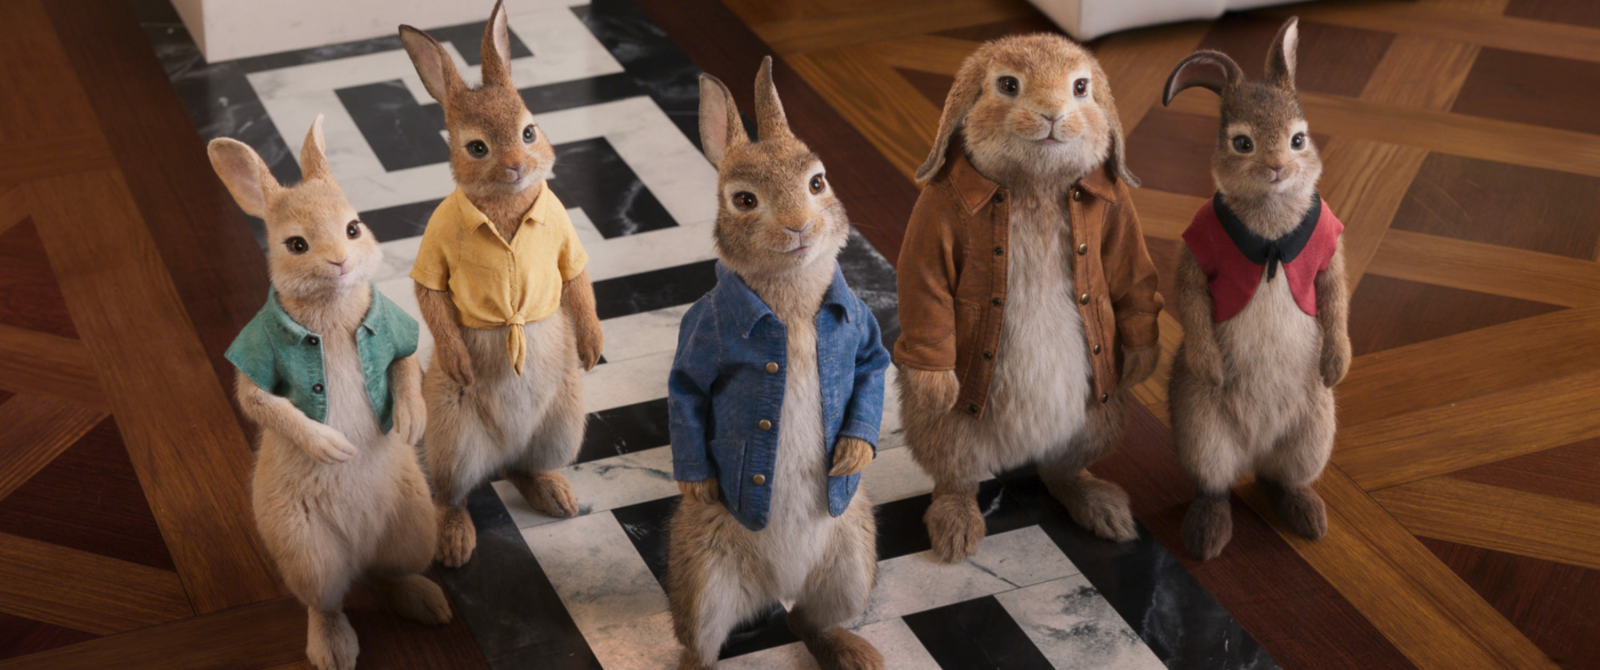 Screen shot from the movie Peter Rabbit 2